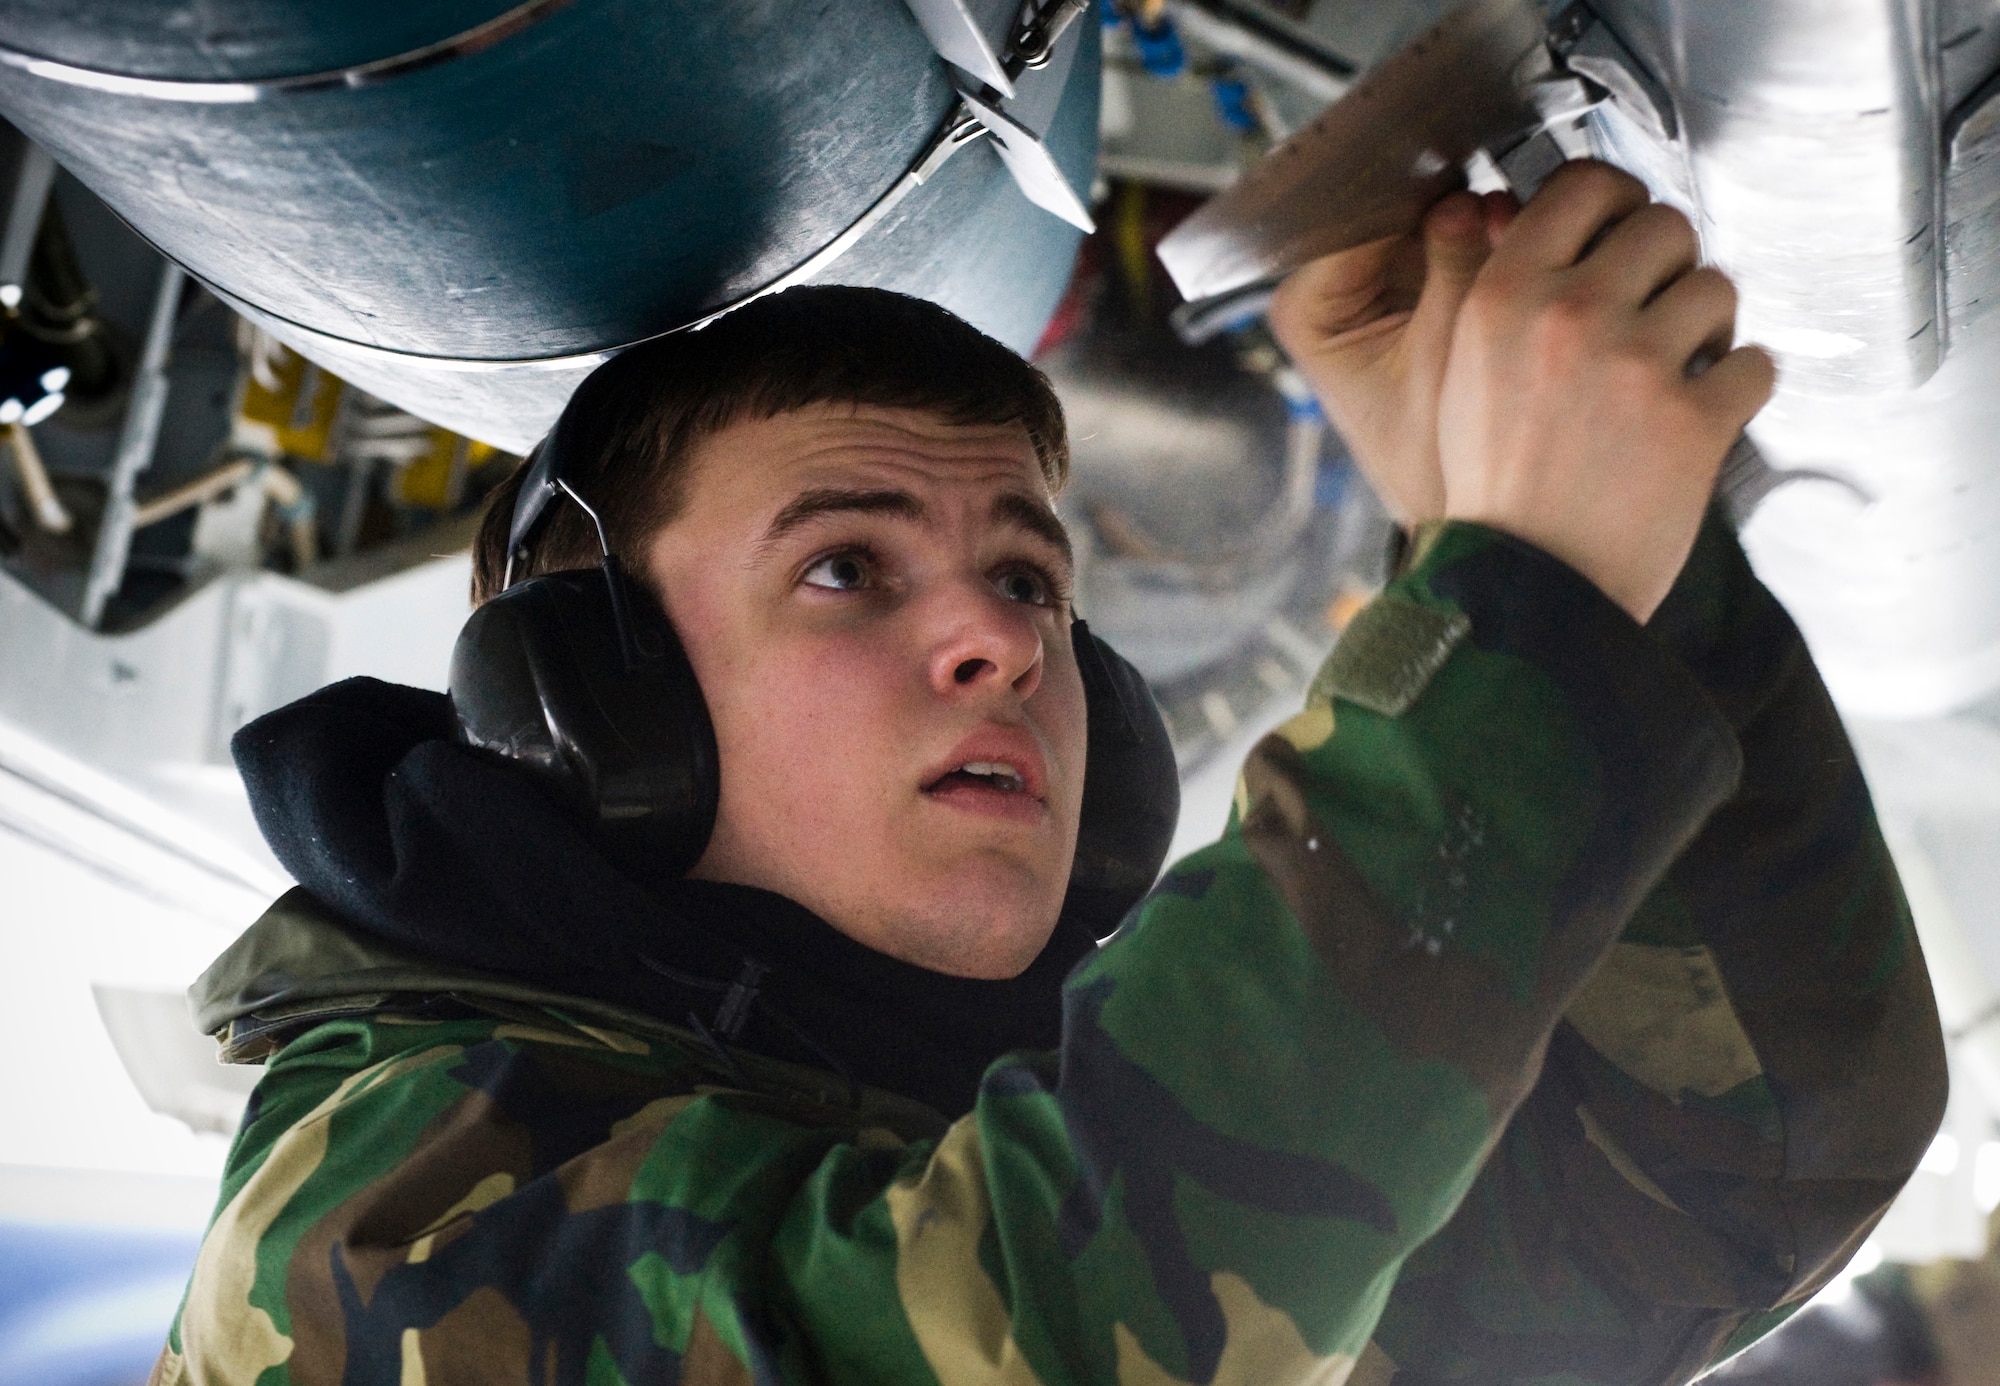 ELMENDORF AIR FORCE BASE, Alaska - Airman 1st Class Jacob Dean, 3rd Aircraft Maintenance Squadron, 90th Aircraft Maintenance Unit, attaches fins to munitions loaded in the F-22A Raptor bomb bays Jan. 16. For the first time at Elmendorf, a mock bomb drop over Alaska provided integral training for both fighters and maintainers in preparation to declare the unit's initial operation capabilities. (U.S. Air Force photo/Senior Airman Garrett Hothan)